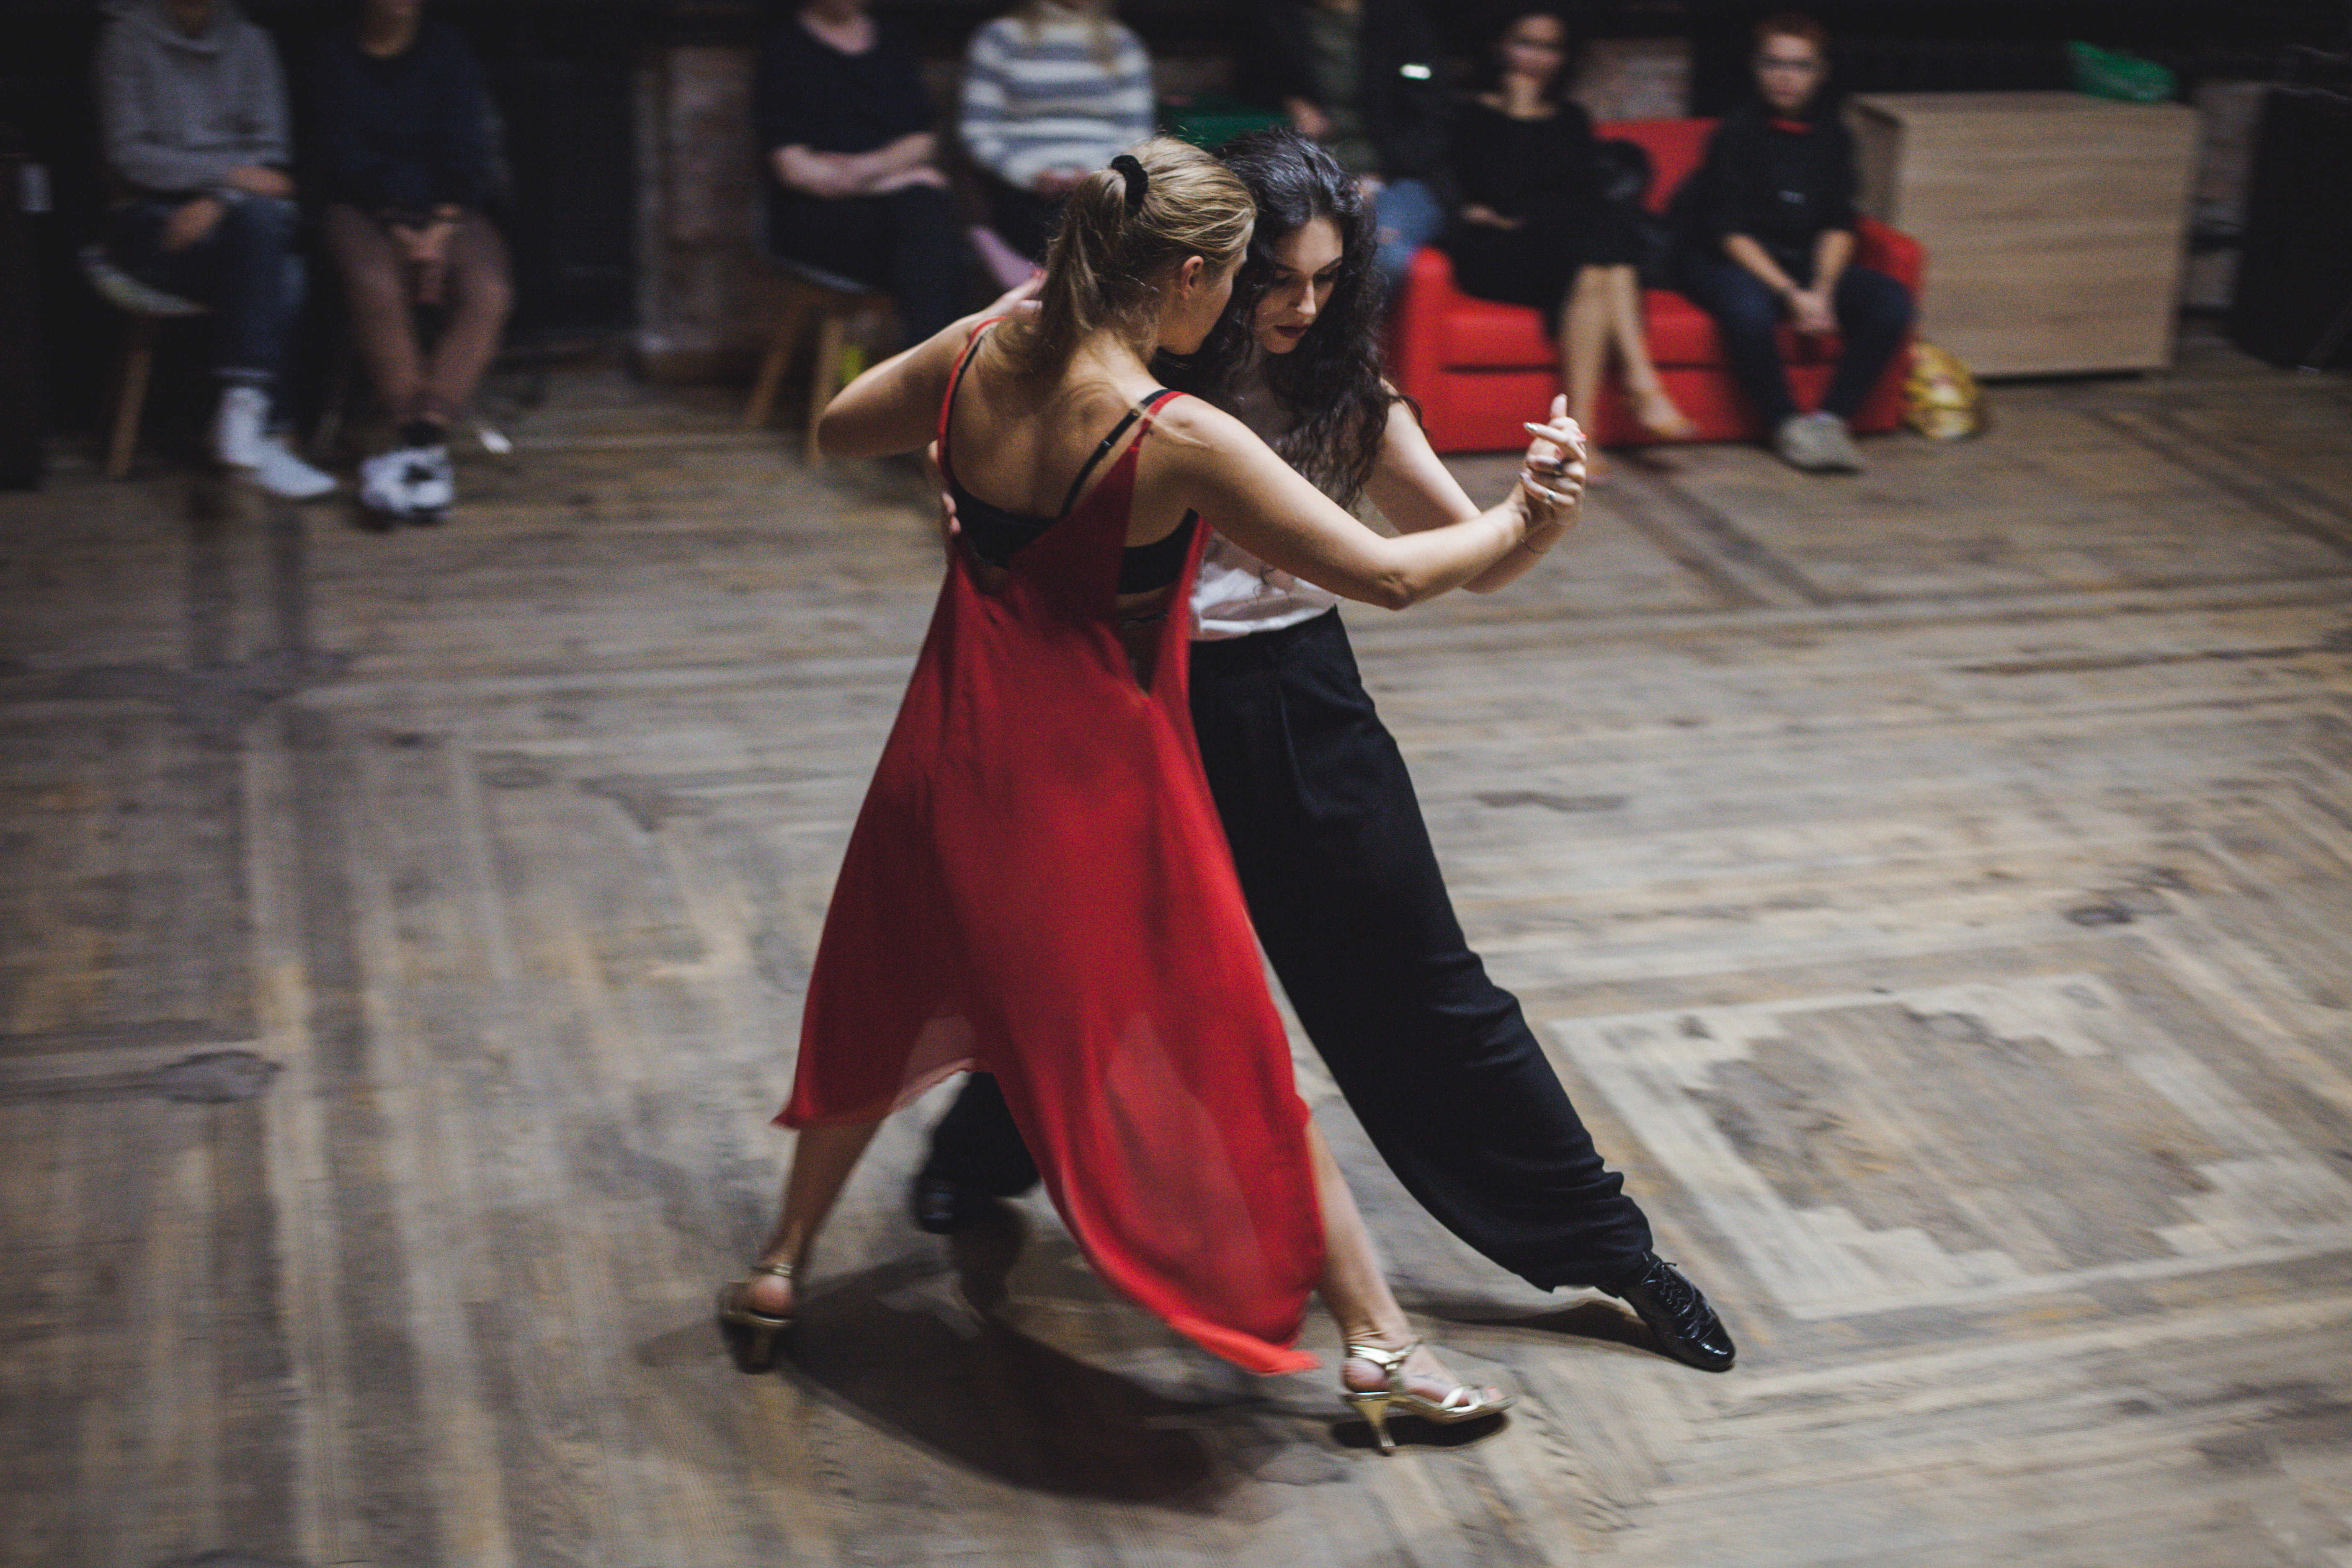 A woman in red dances with a woman in black at a dance studio